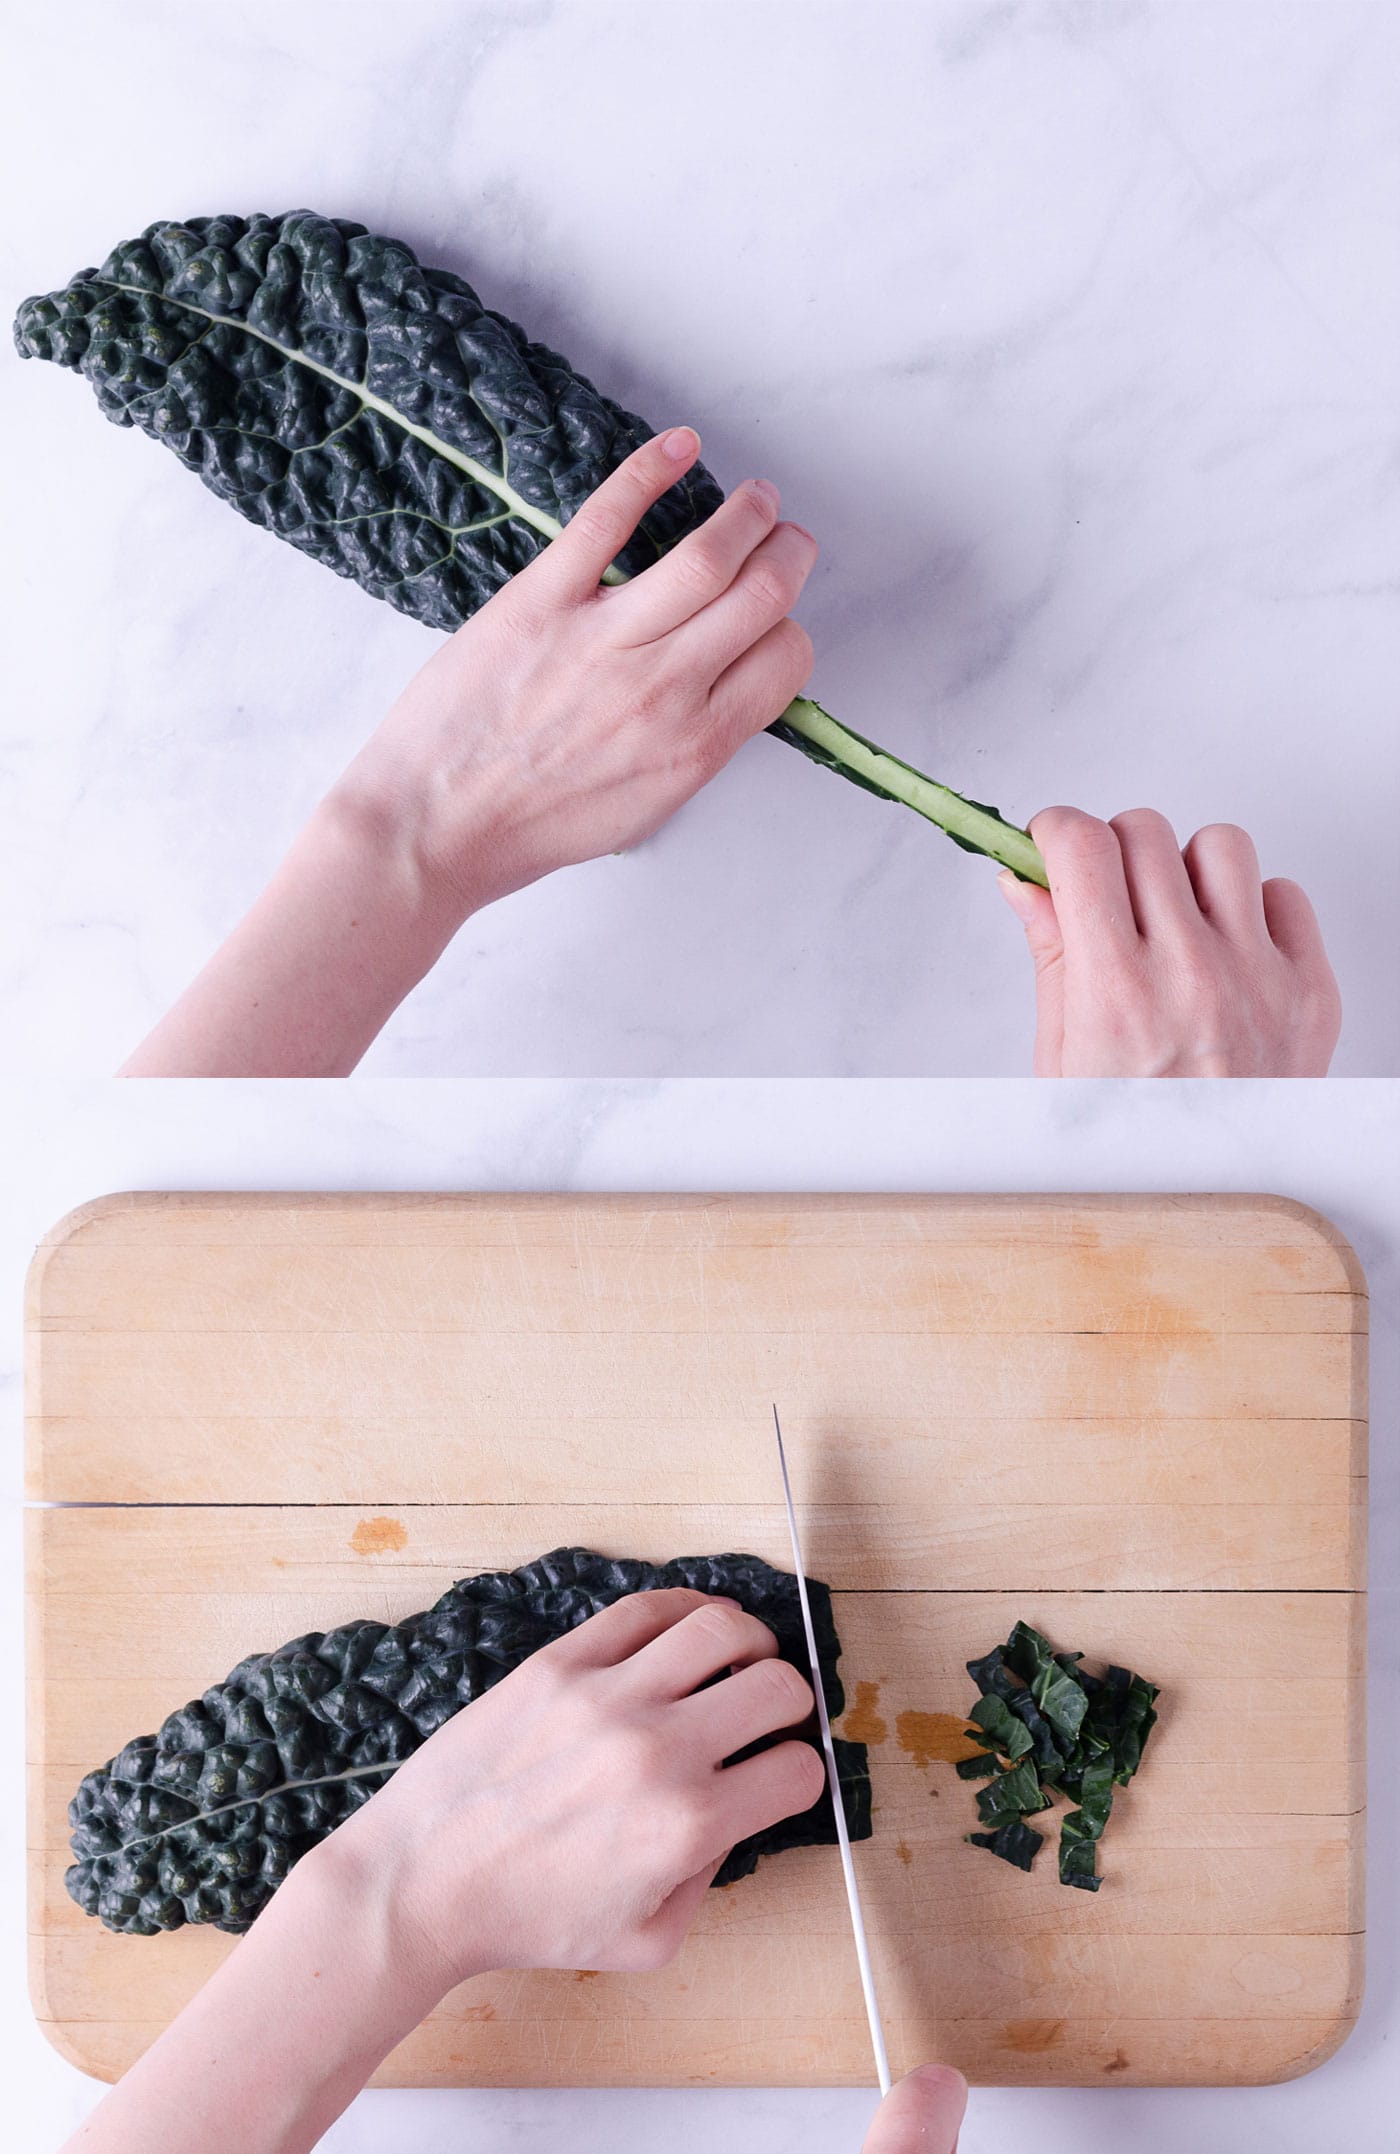 Side by side photos showing how to remove stem of kale and thinly slice.